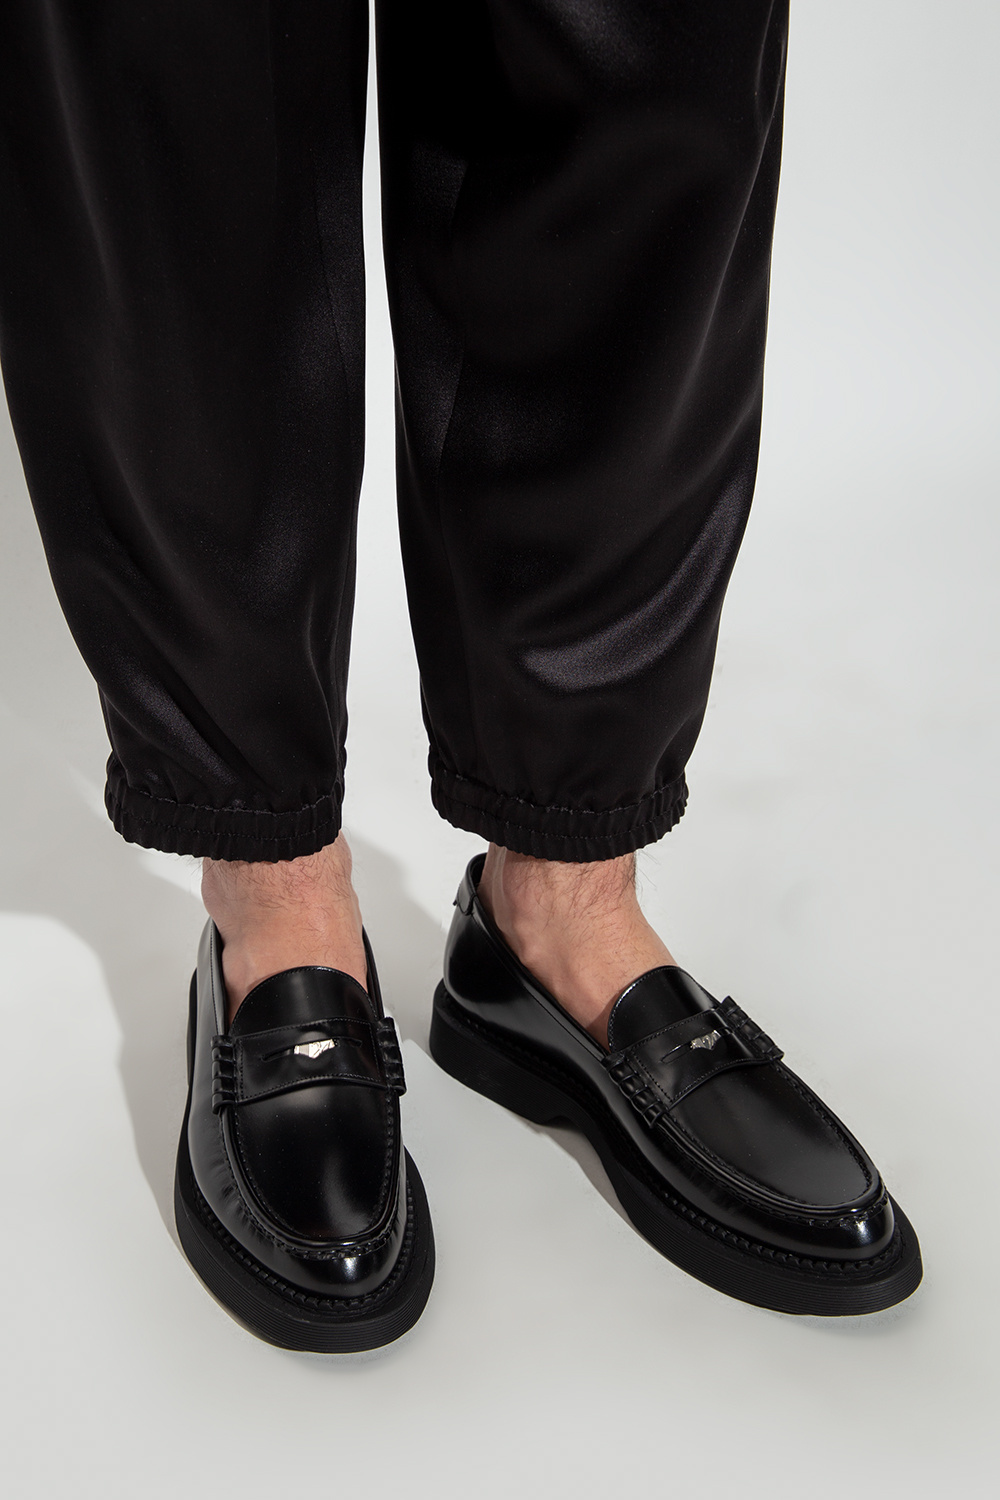 Saint Laurent ‘Teddy Penny’ loafers